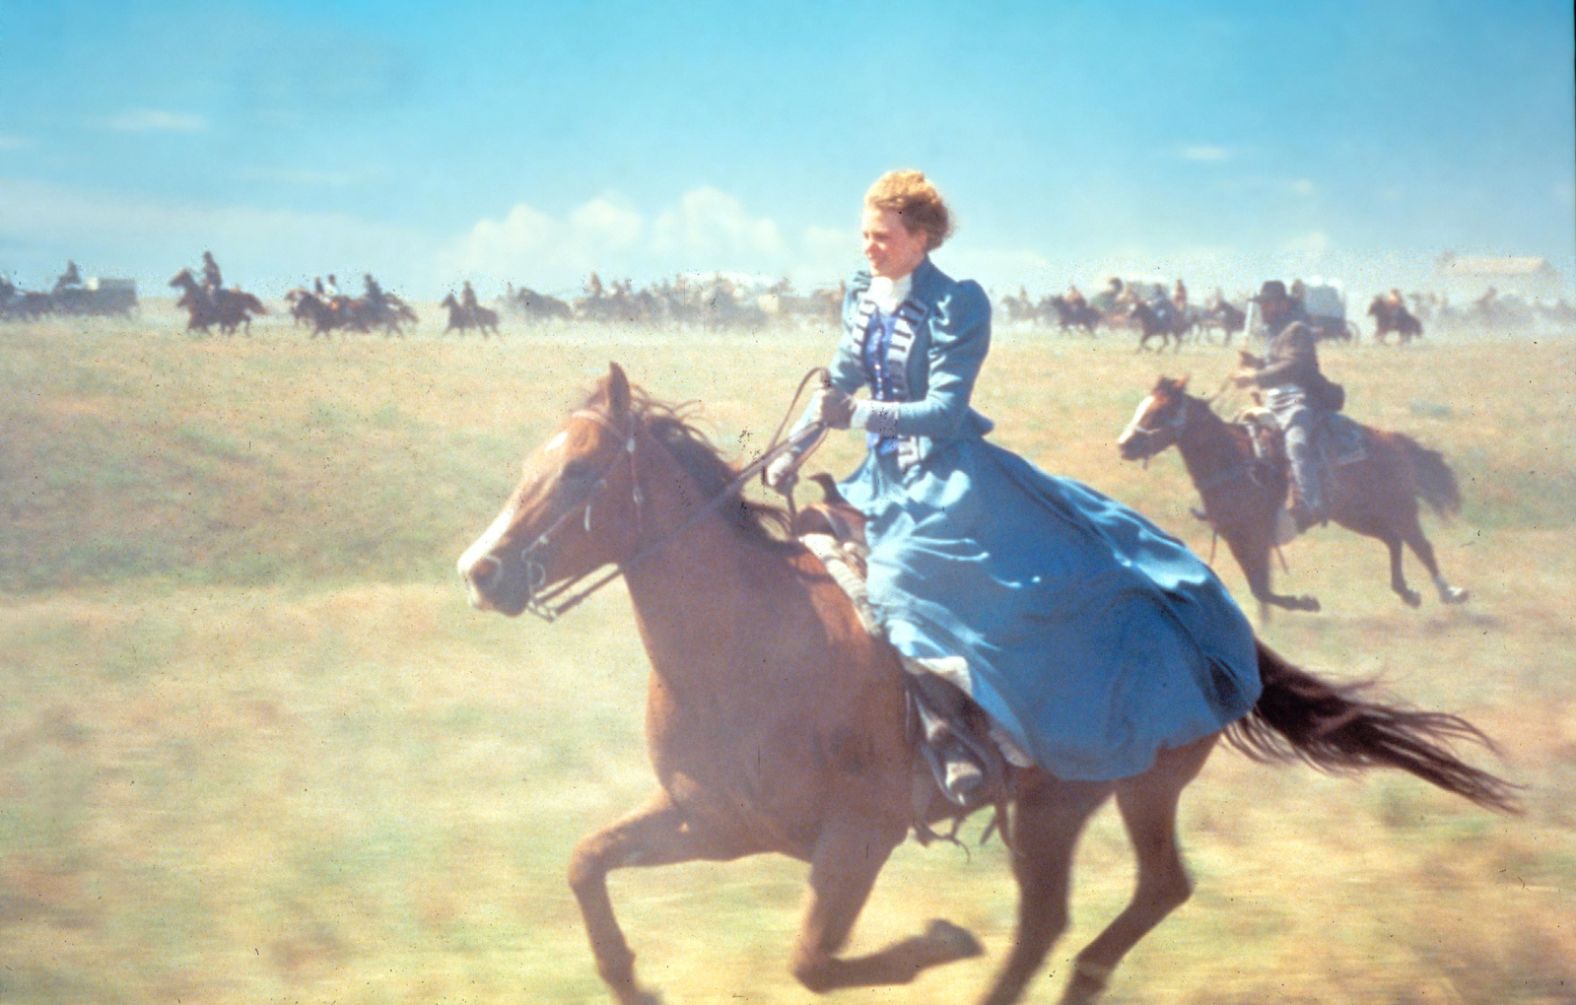 Kidman rides a horse in 1992's "Far and Away," which Cruise also starred in.